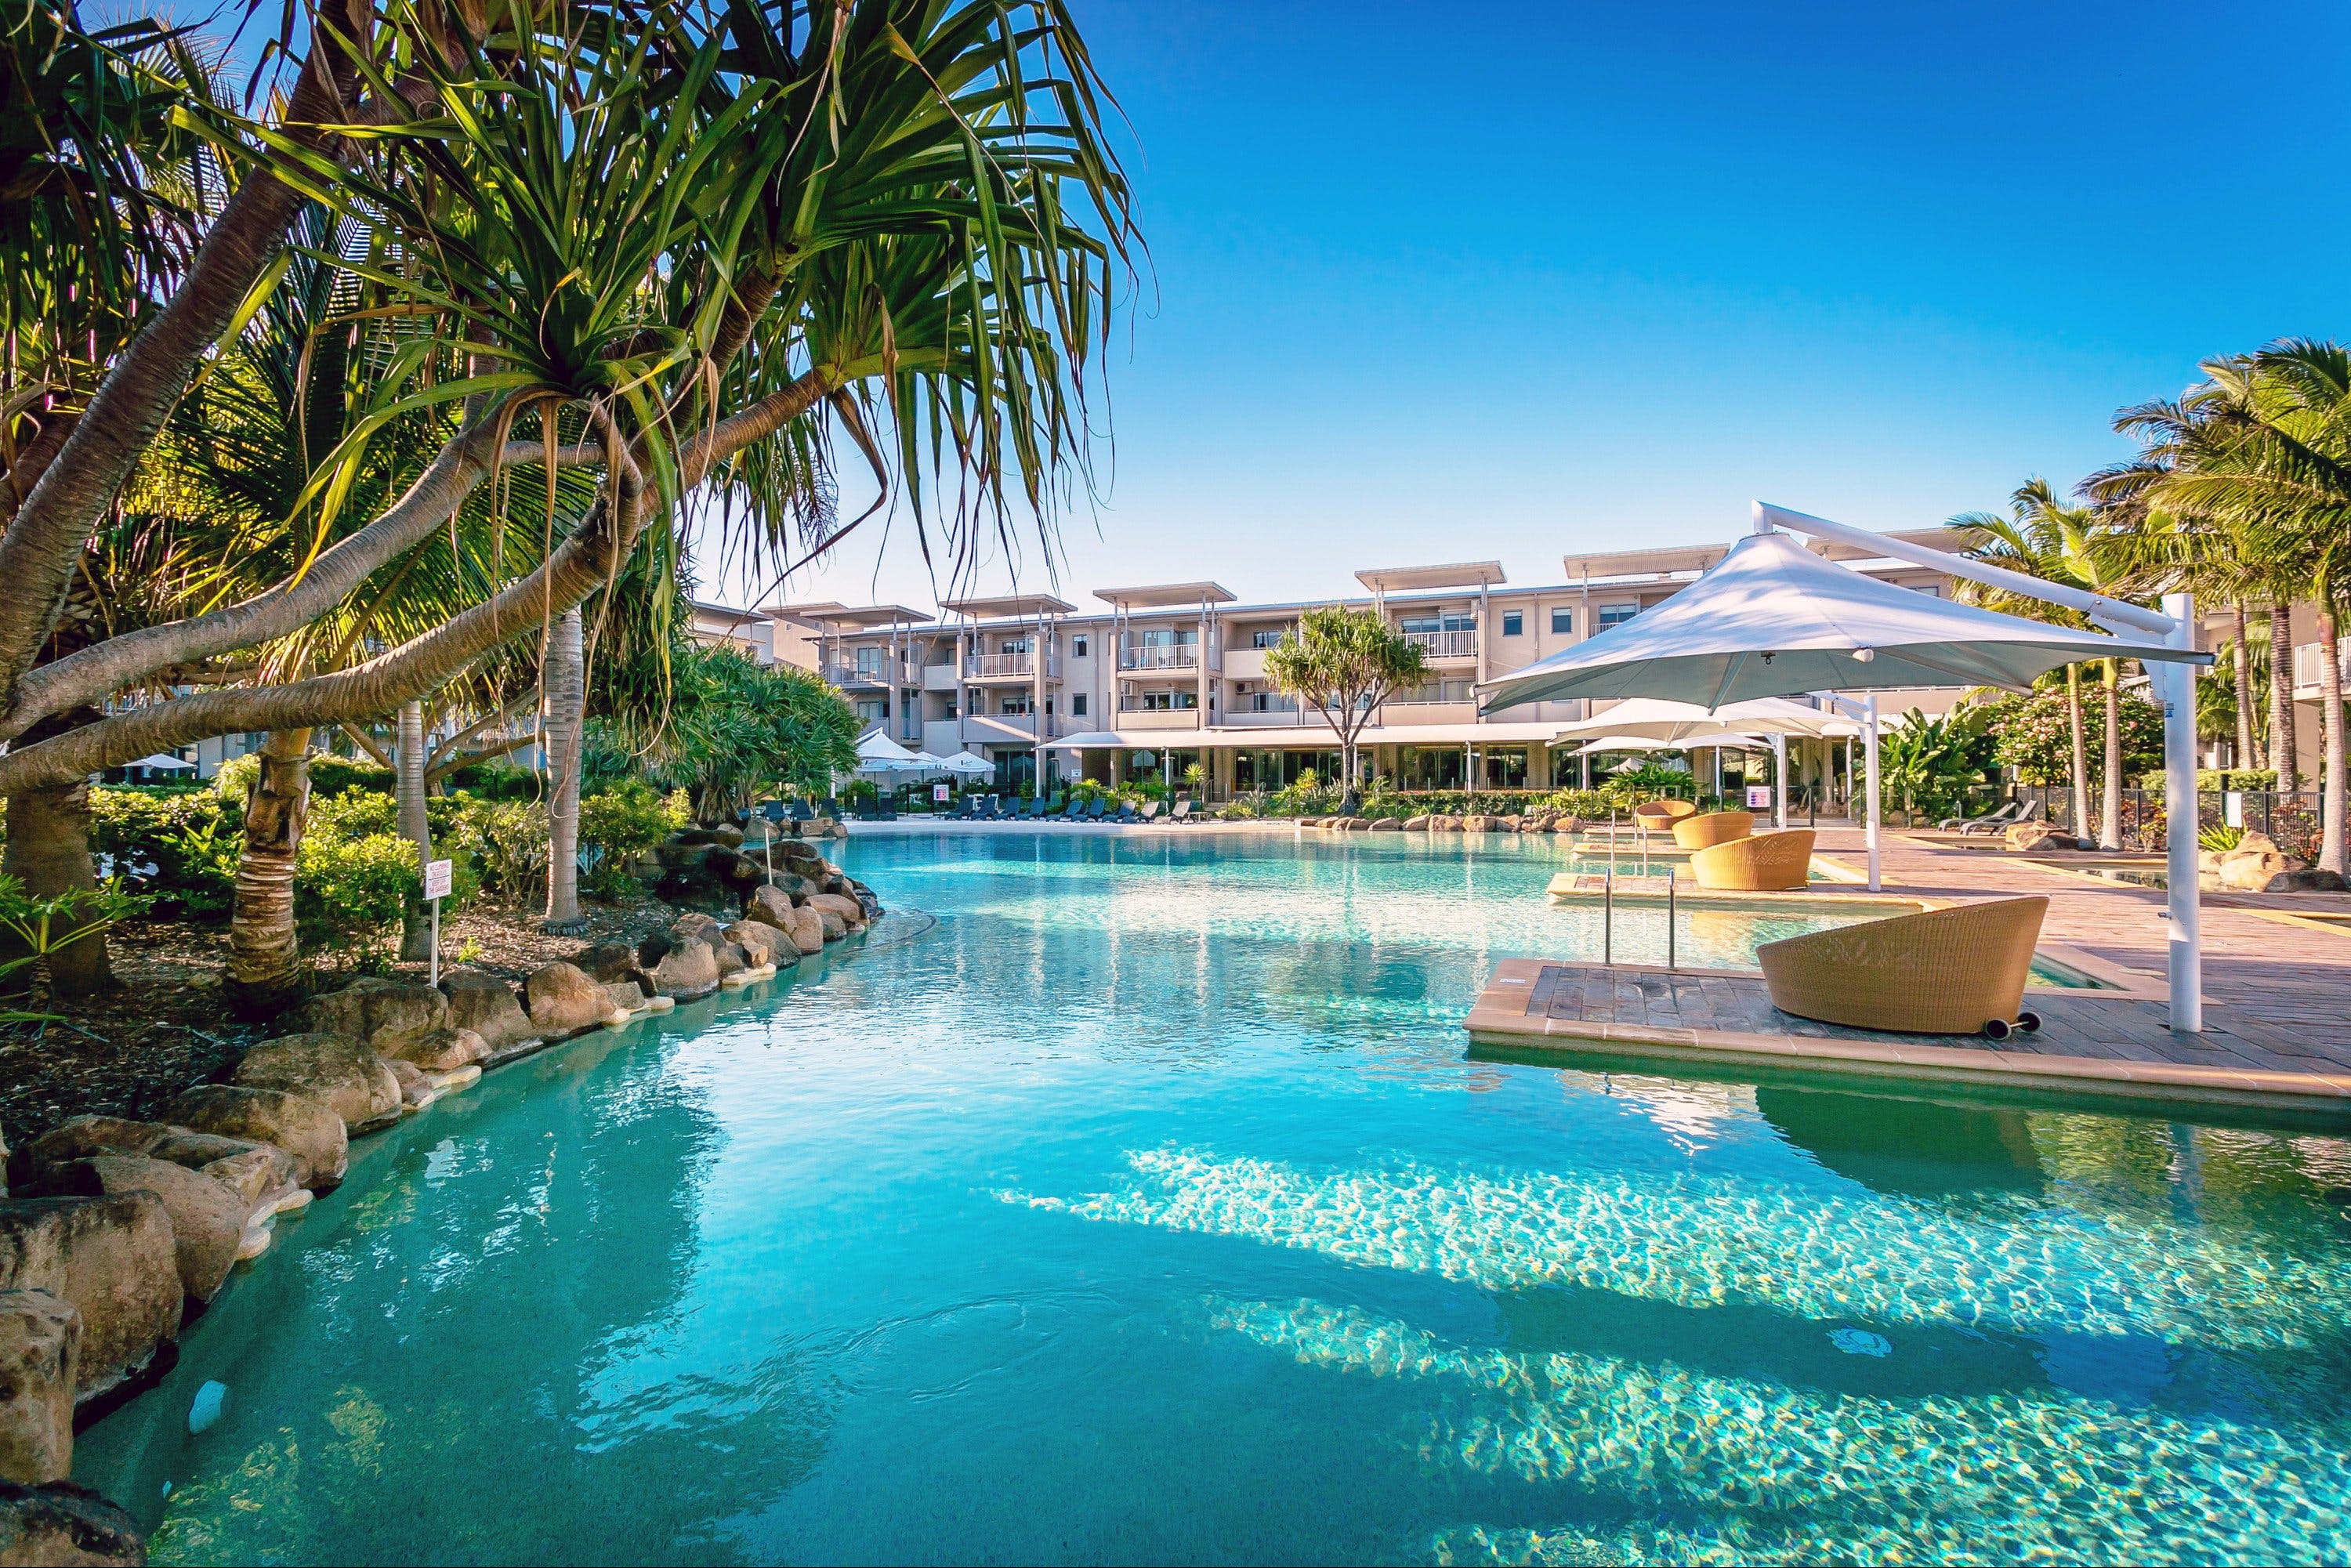 Peppers Salt Resort and Spa - Dalby Accommodation